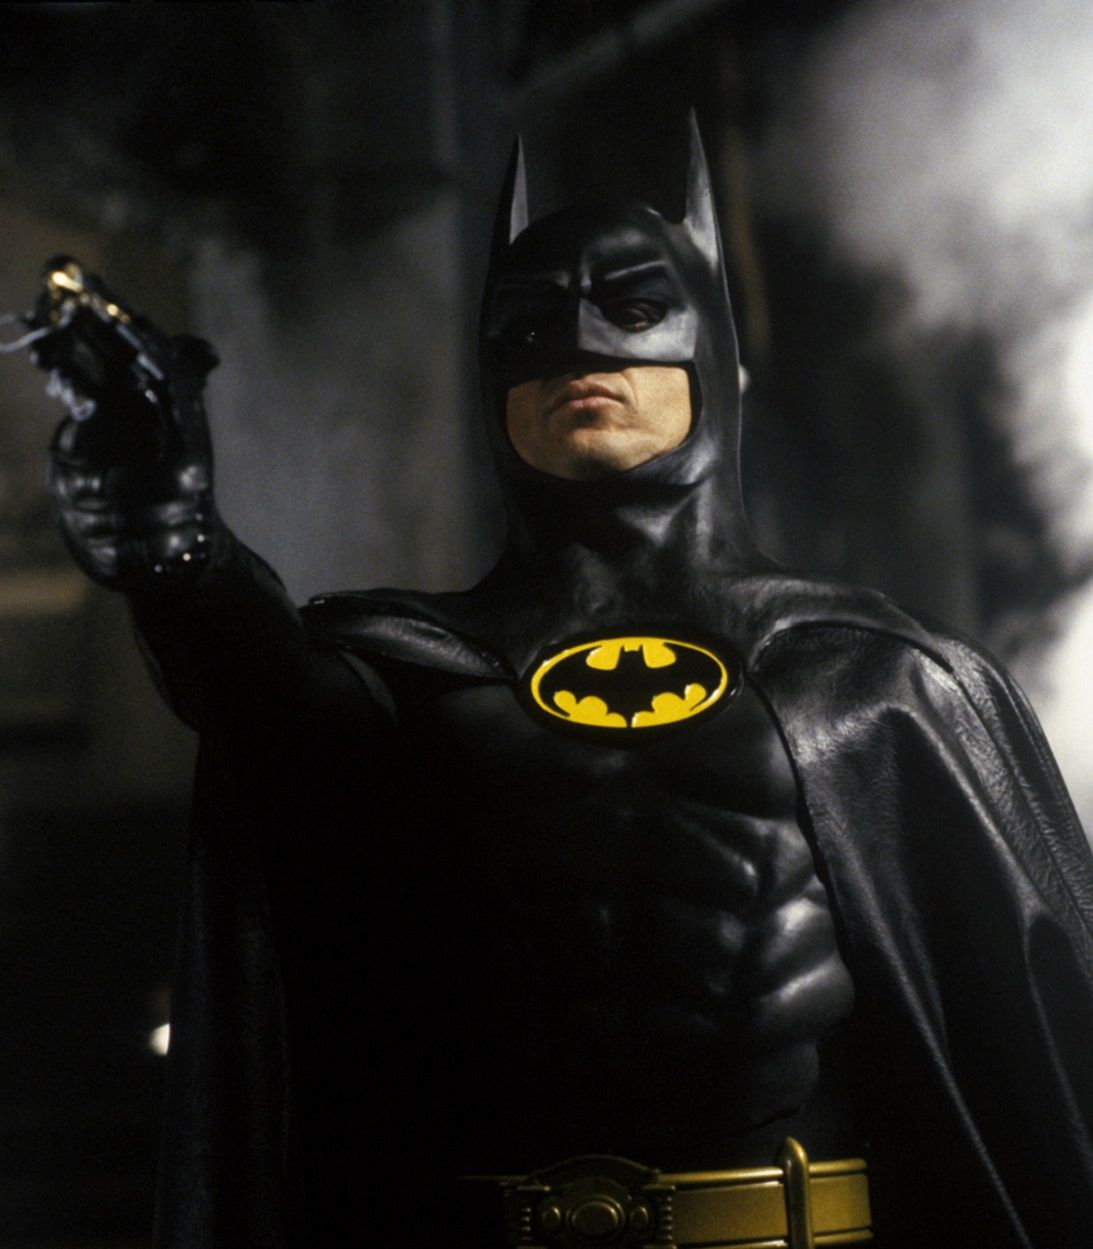 Five Angry Reactions to Michael Keaton Being Cast as Batman